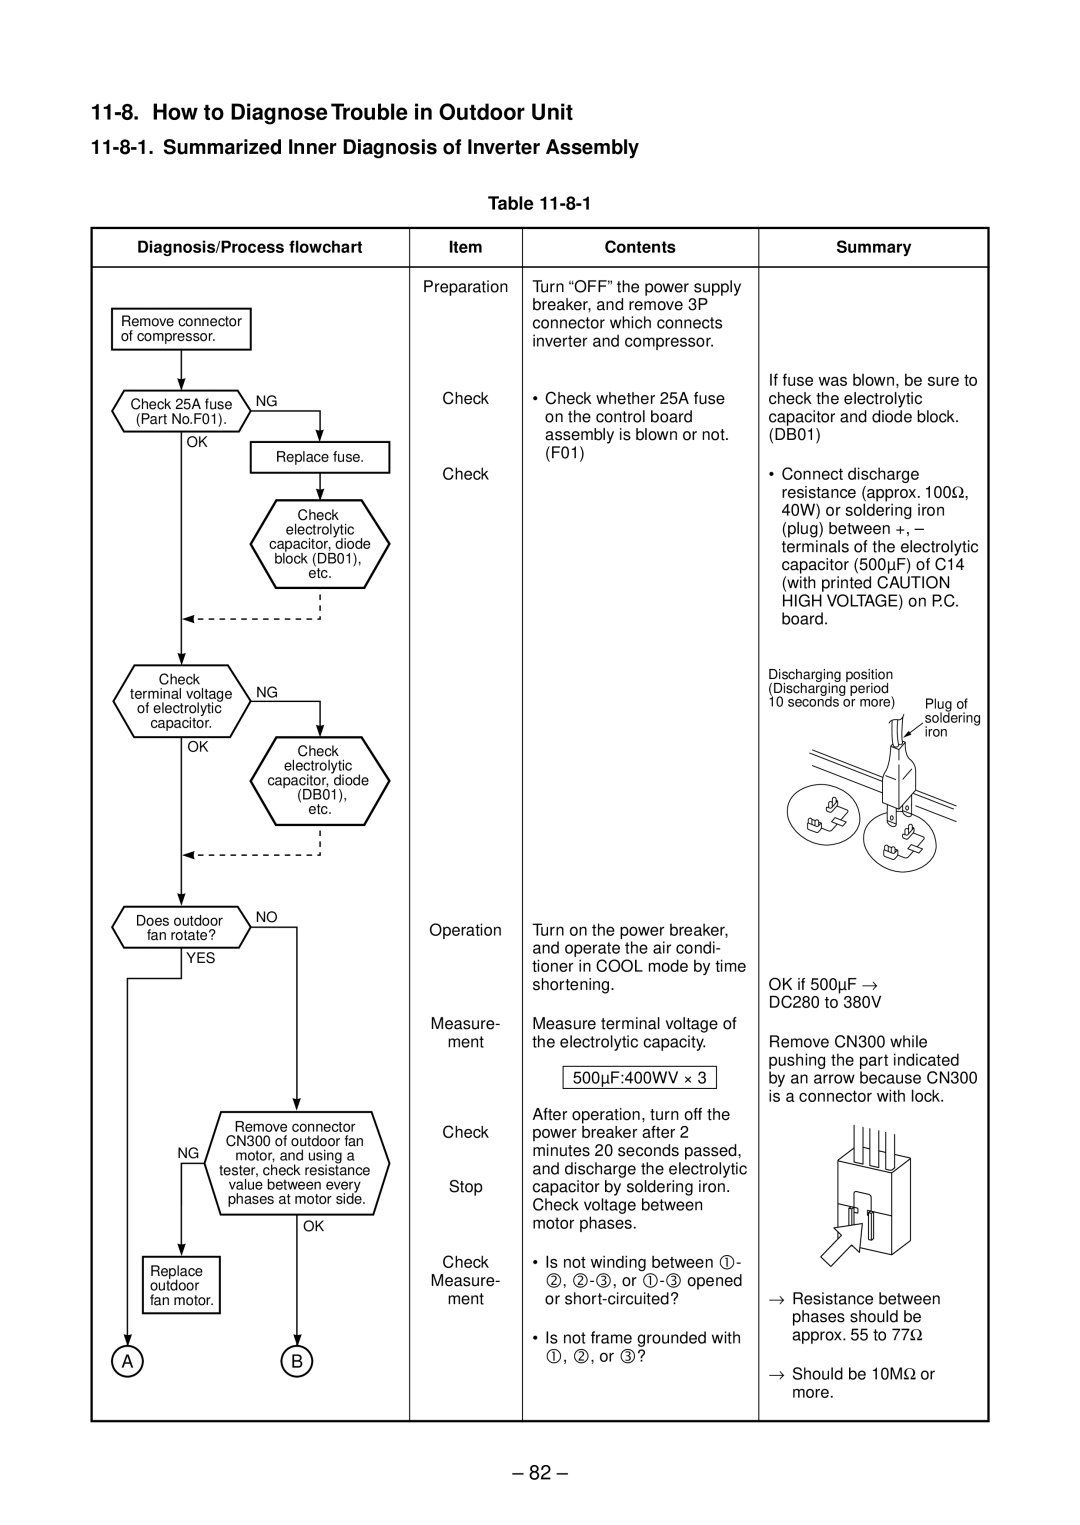 Toshiba RAS-B10SKVP-E How to Diagnose Trouble in Outdoor Unit, 82, Diagnosis/Process flowchart, Item, Contents, Summary 